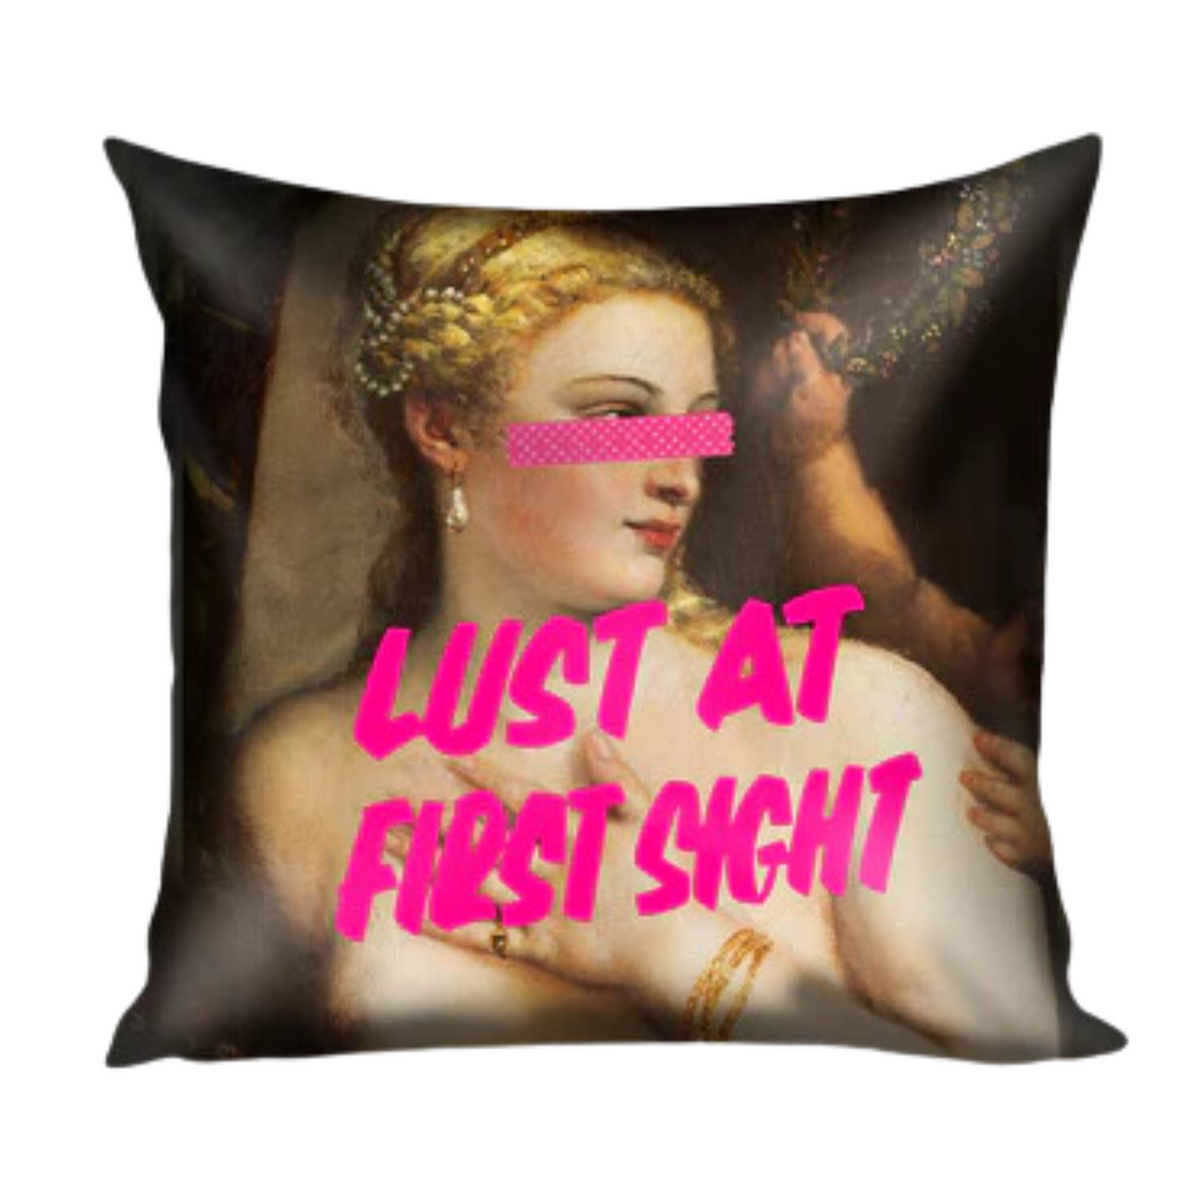 "LUST AT FIRST SIGHT' HANDMADE FEATHER  CUSHION -MEXICO